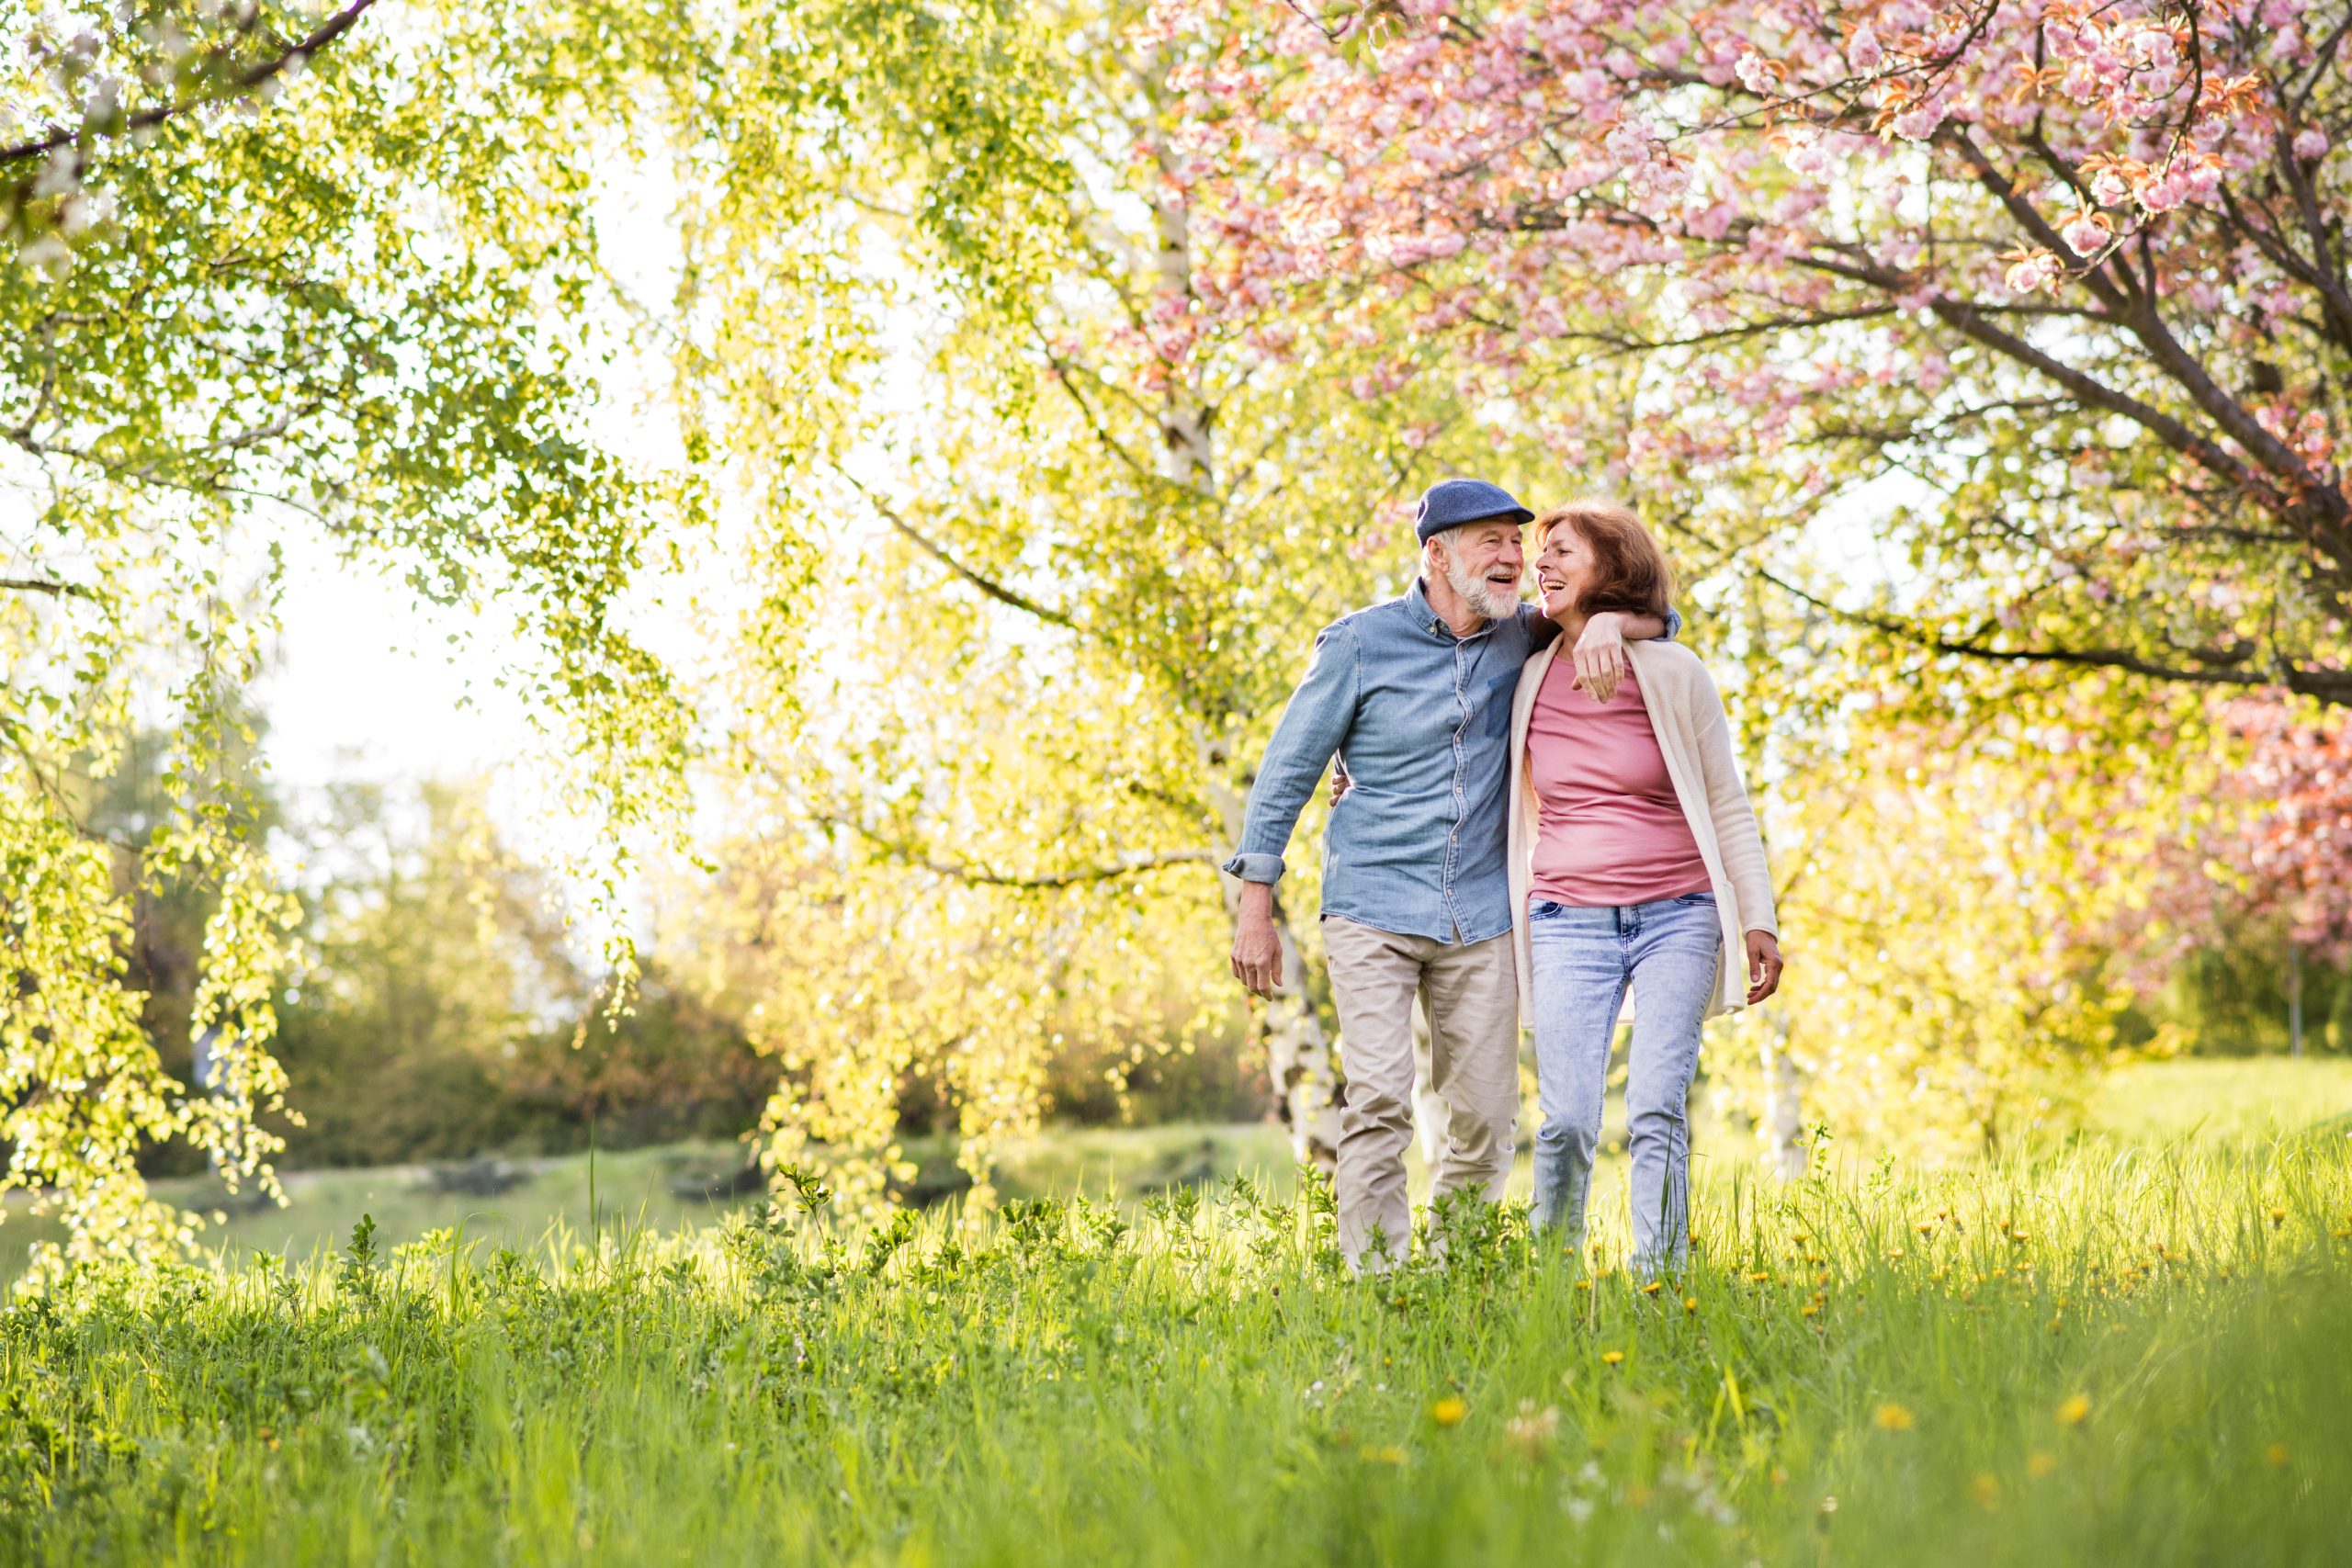 Senior couple walking outside in the spring with blooming trees and green meadow grasses